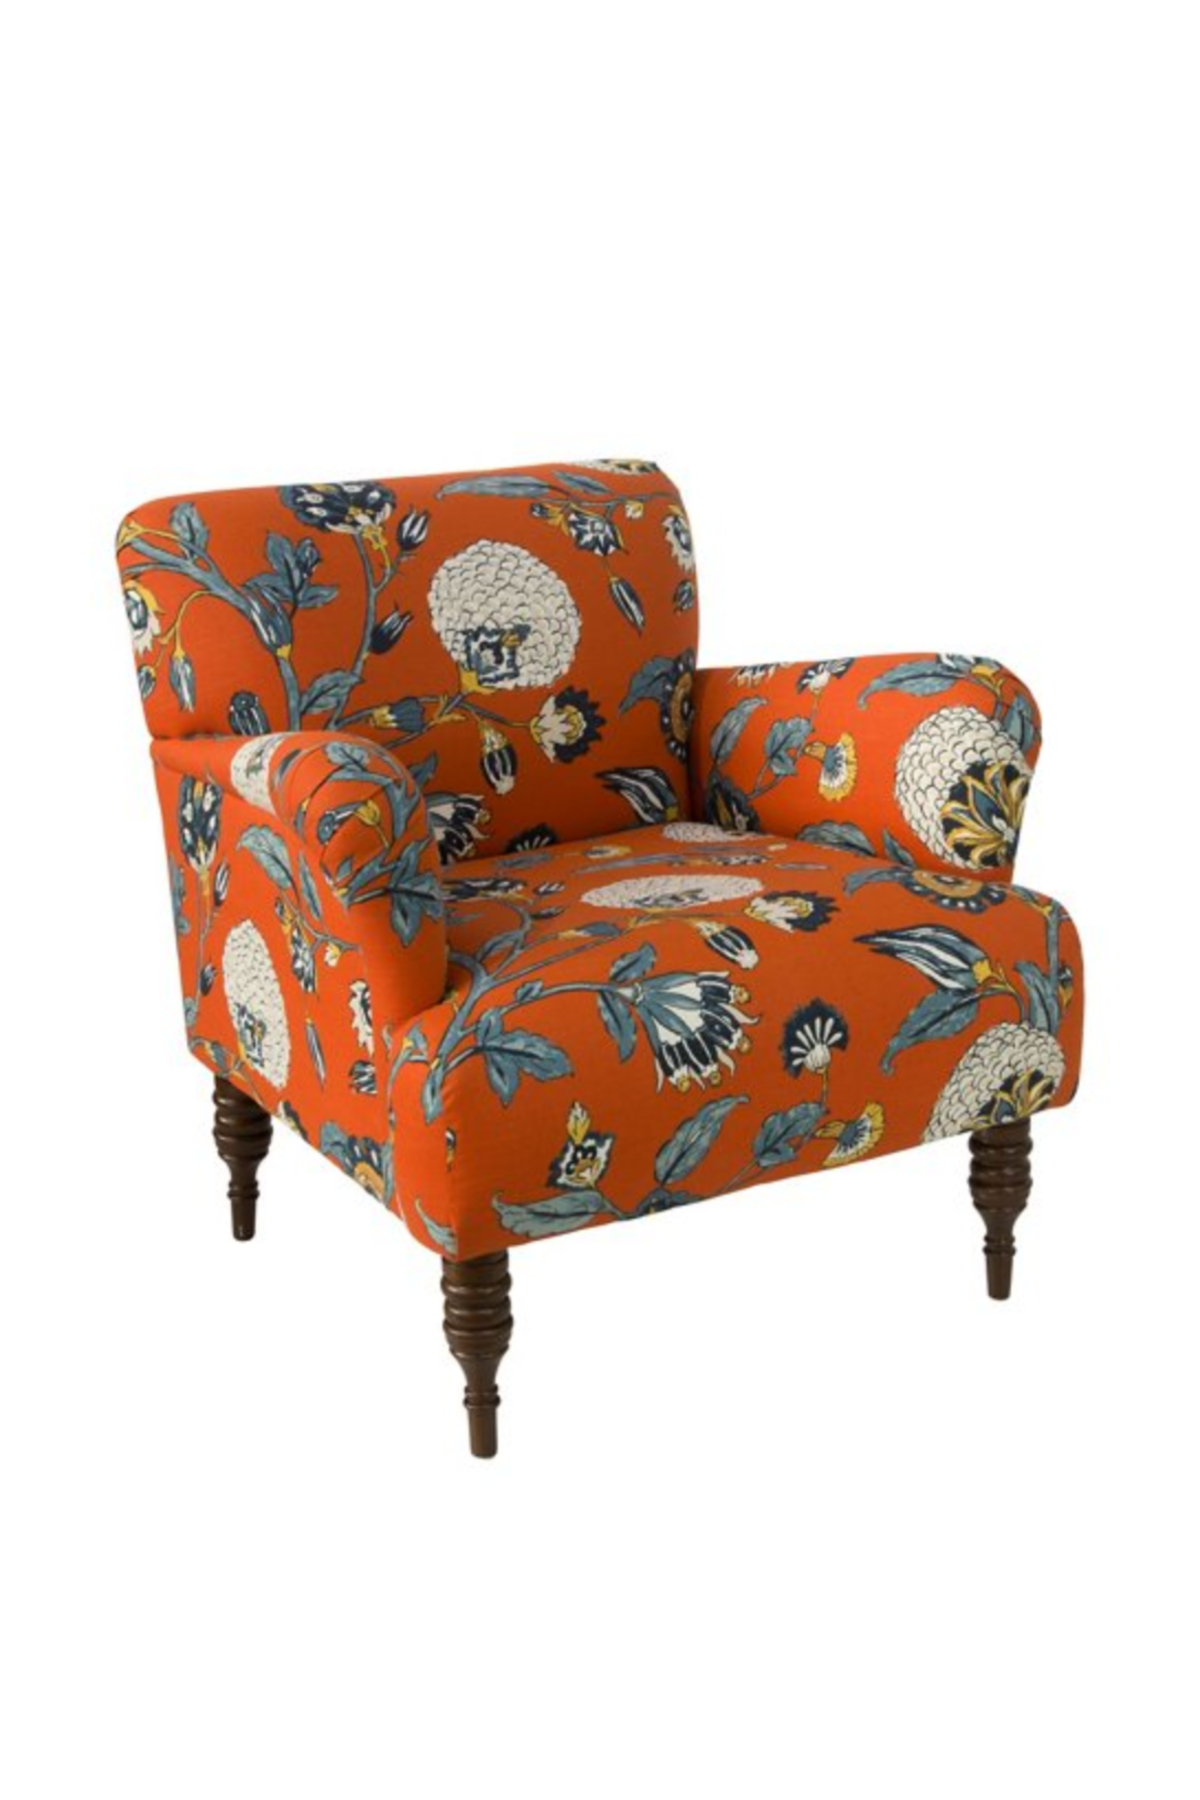 upholstered reading chair